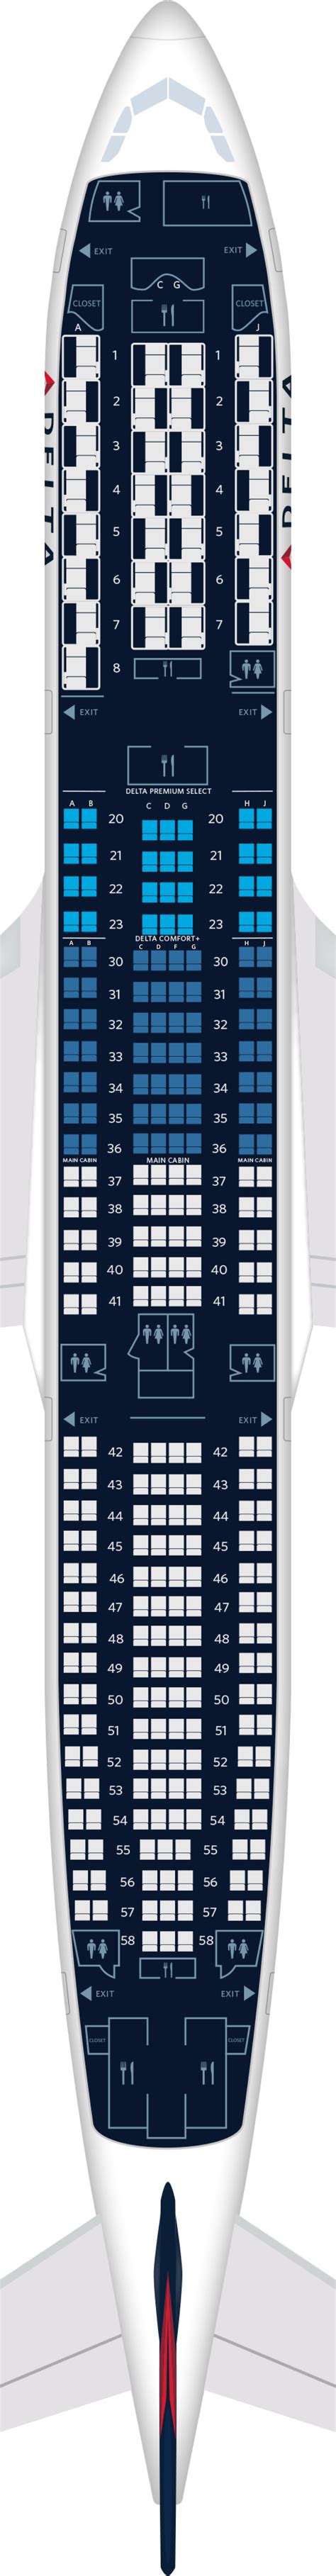 Delta A330 900 Seat Map